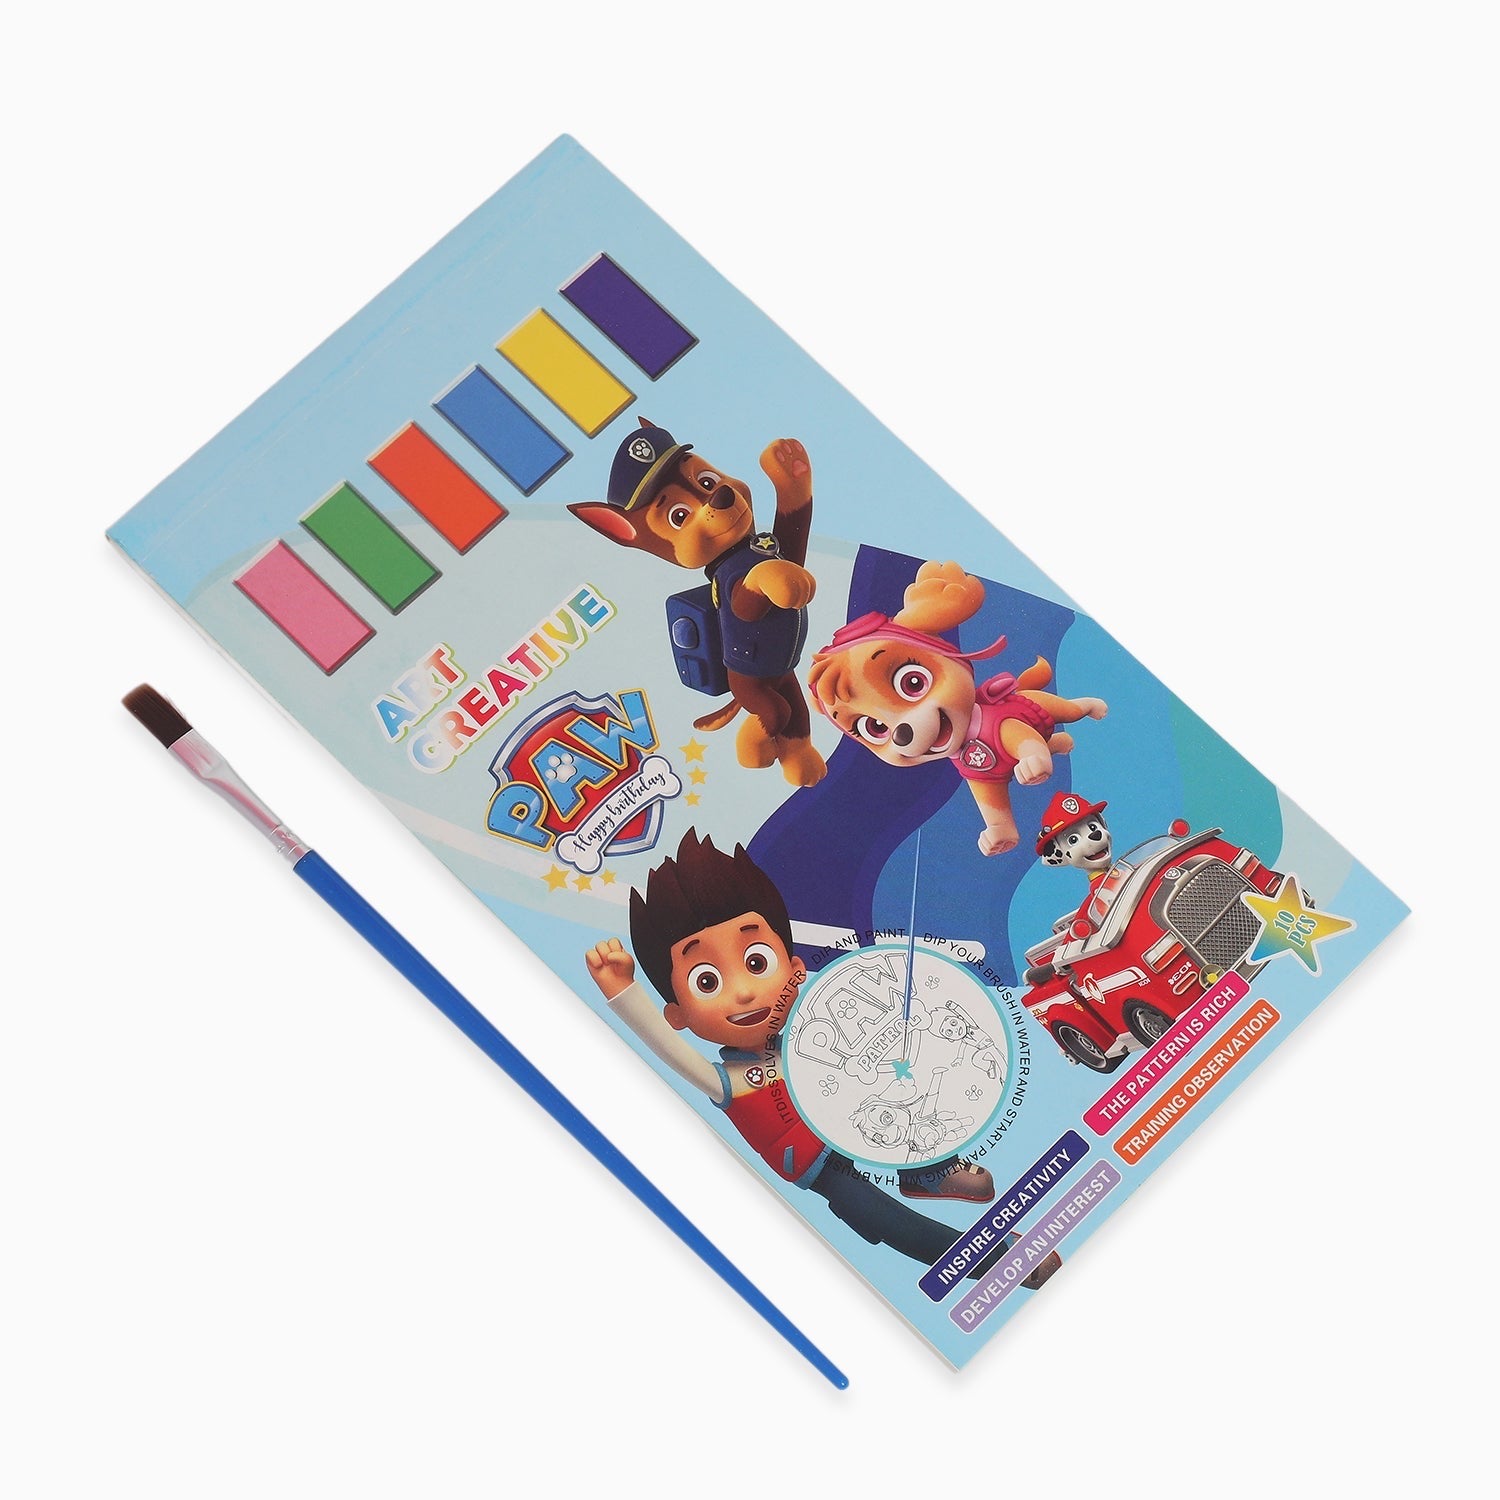 paint book with printed pages & inbuilt color-random boy print-for your painting solutions - Kidspark